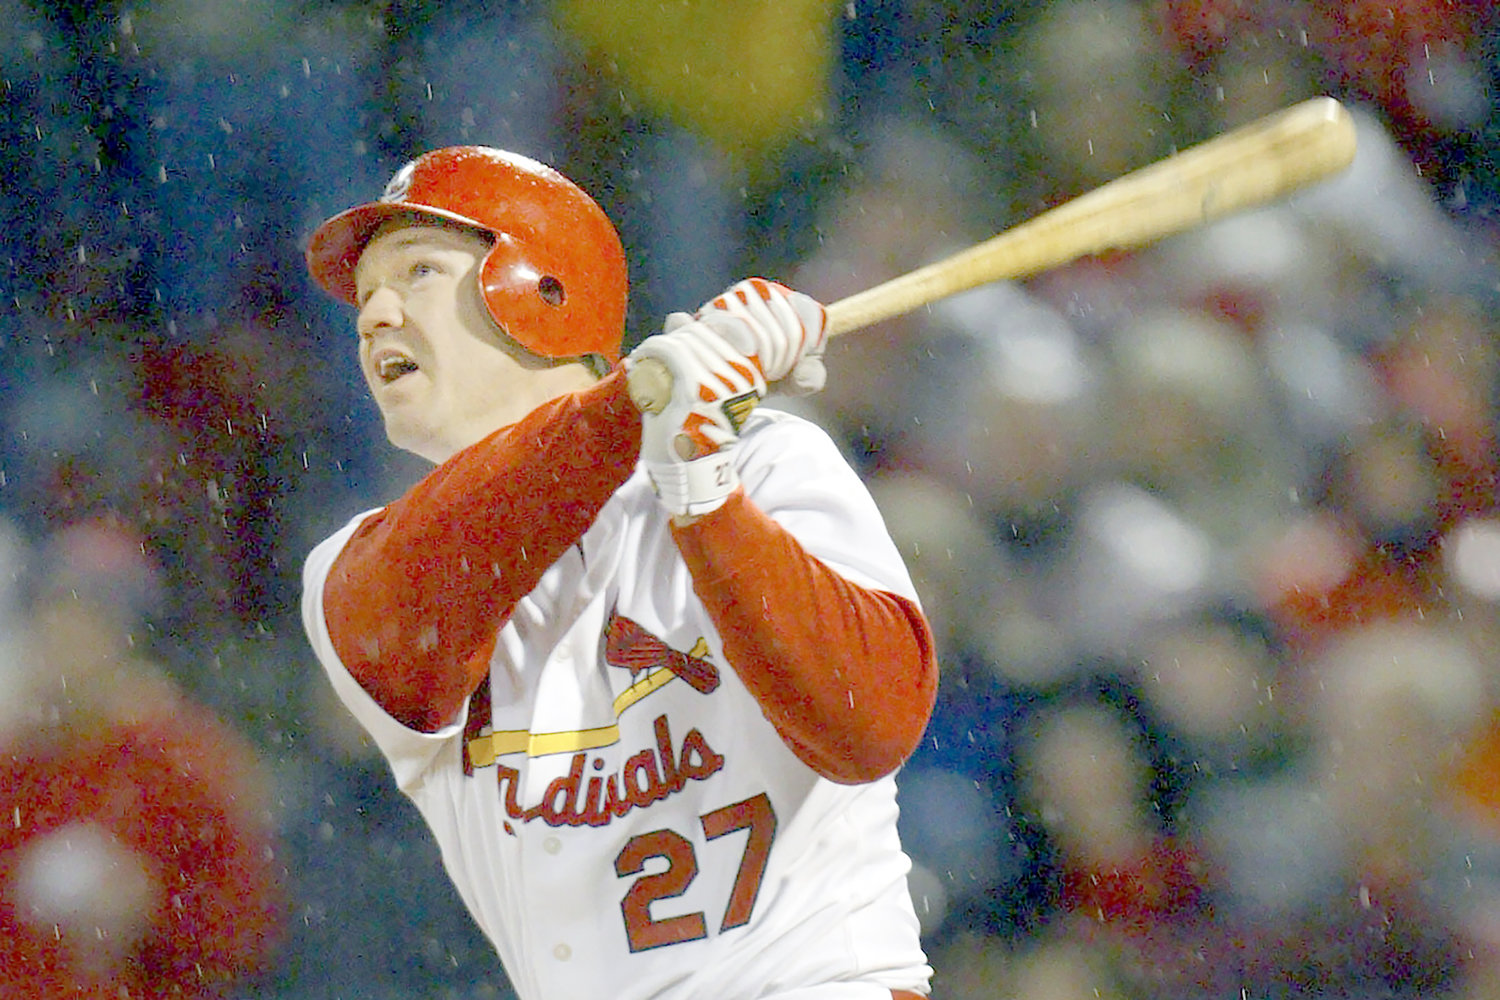 St. Louis Cardinals batter Scott Rolen watches his two-run home run off Houston Astros pitcher Chad Harville during Game 2 of the NLCS on Oct. 14, 2004, in St. Louis. Rolen was elected to baseball’s Hall of Fame on Tuesday with five votes to spare above the 75% needed.